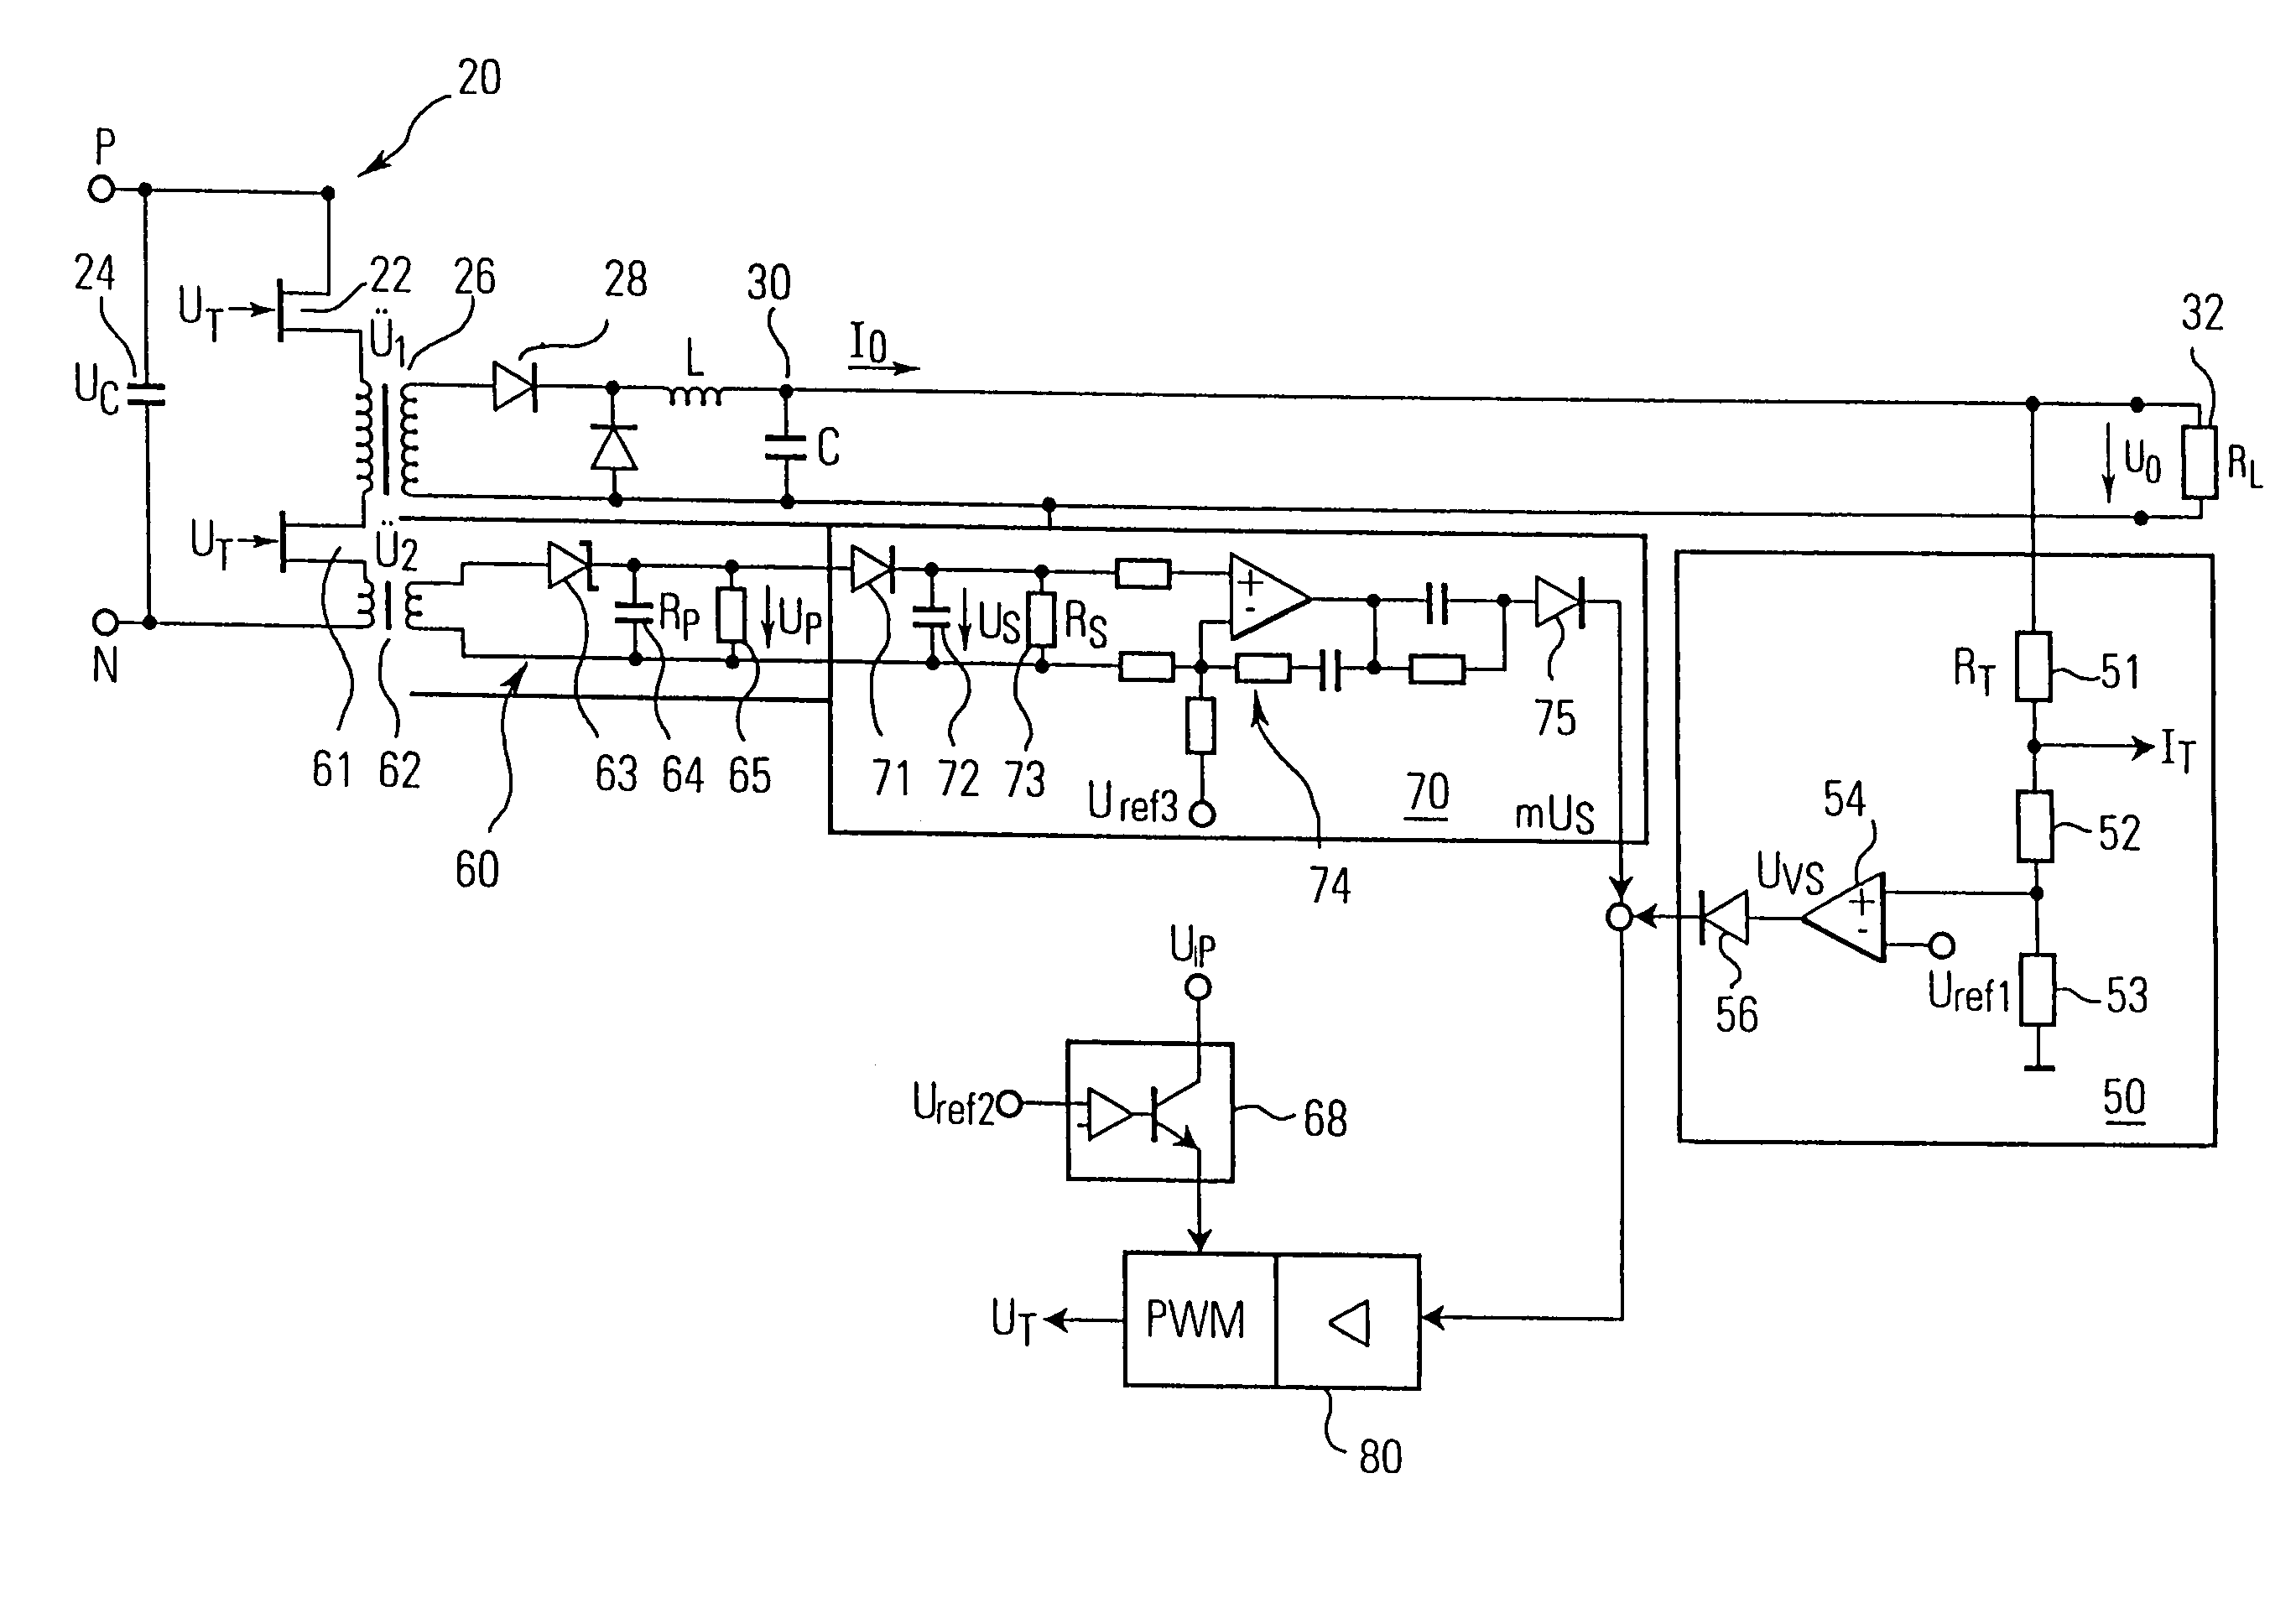 Power supply device comprising several switched-mode power supply units that are connected in parallel